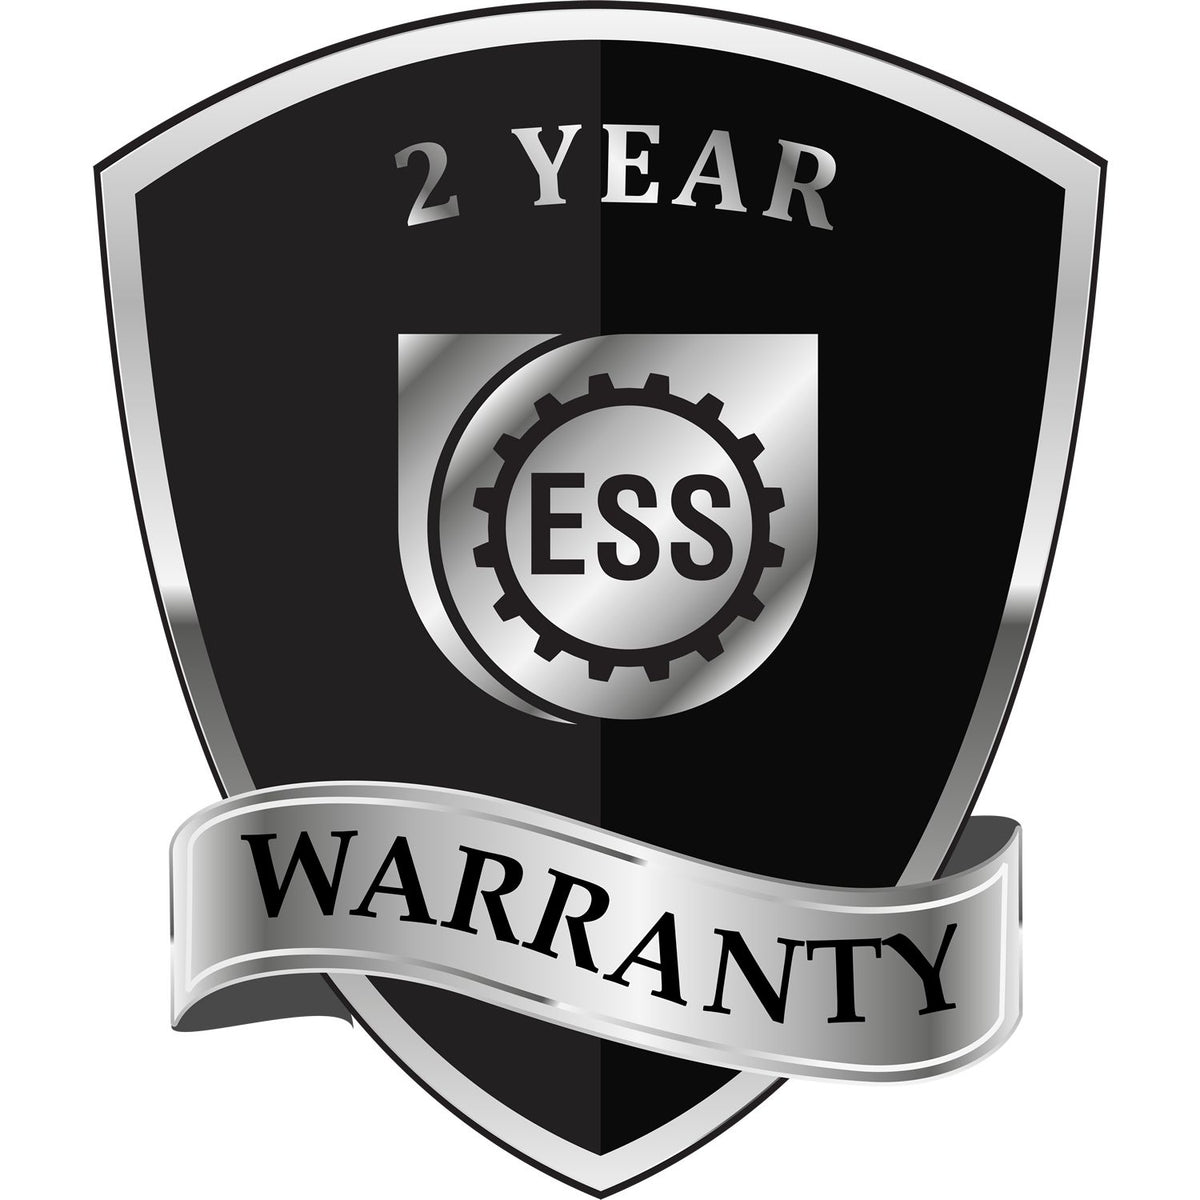 A badge or emblem showing a warranty icon for the Heavy Duty Cast Iron Missouri Architect Embosser